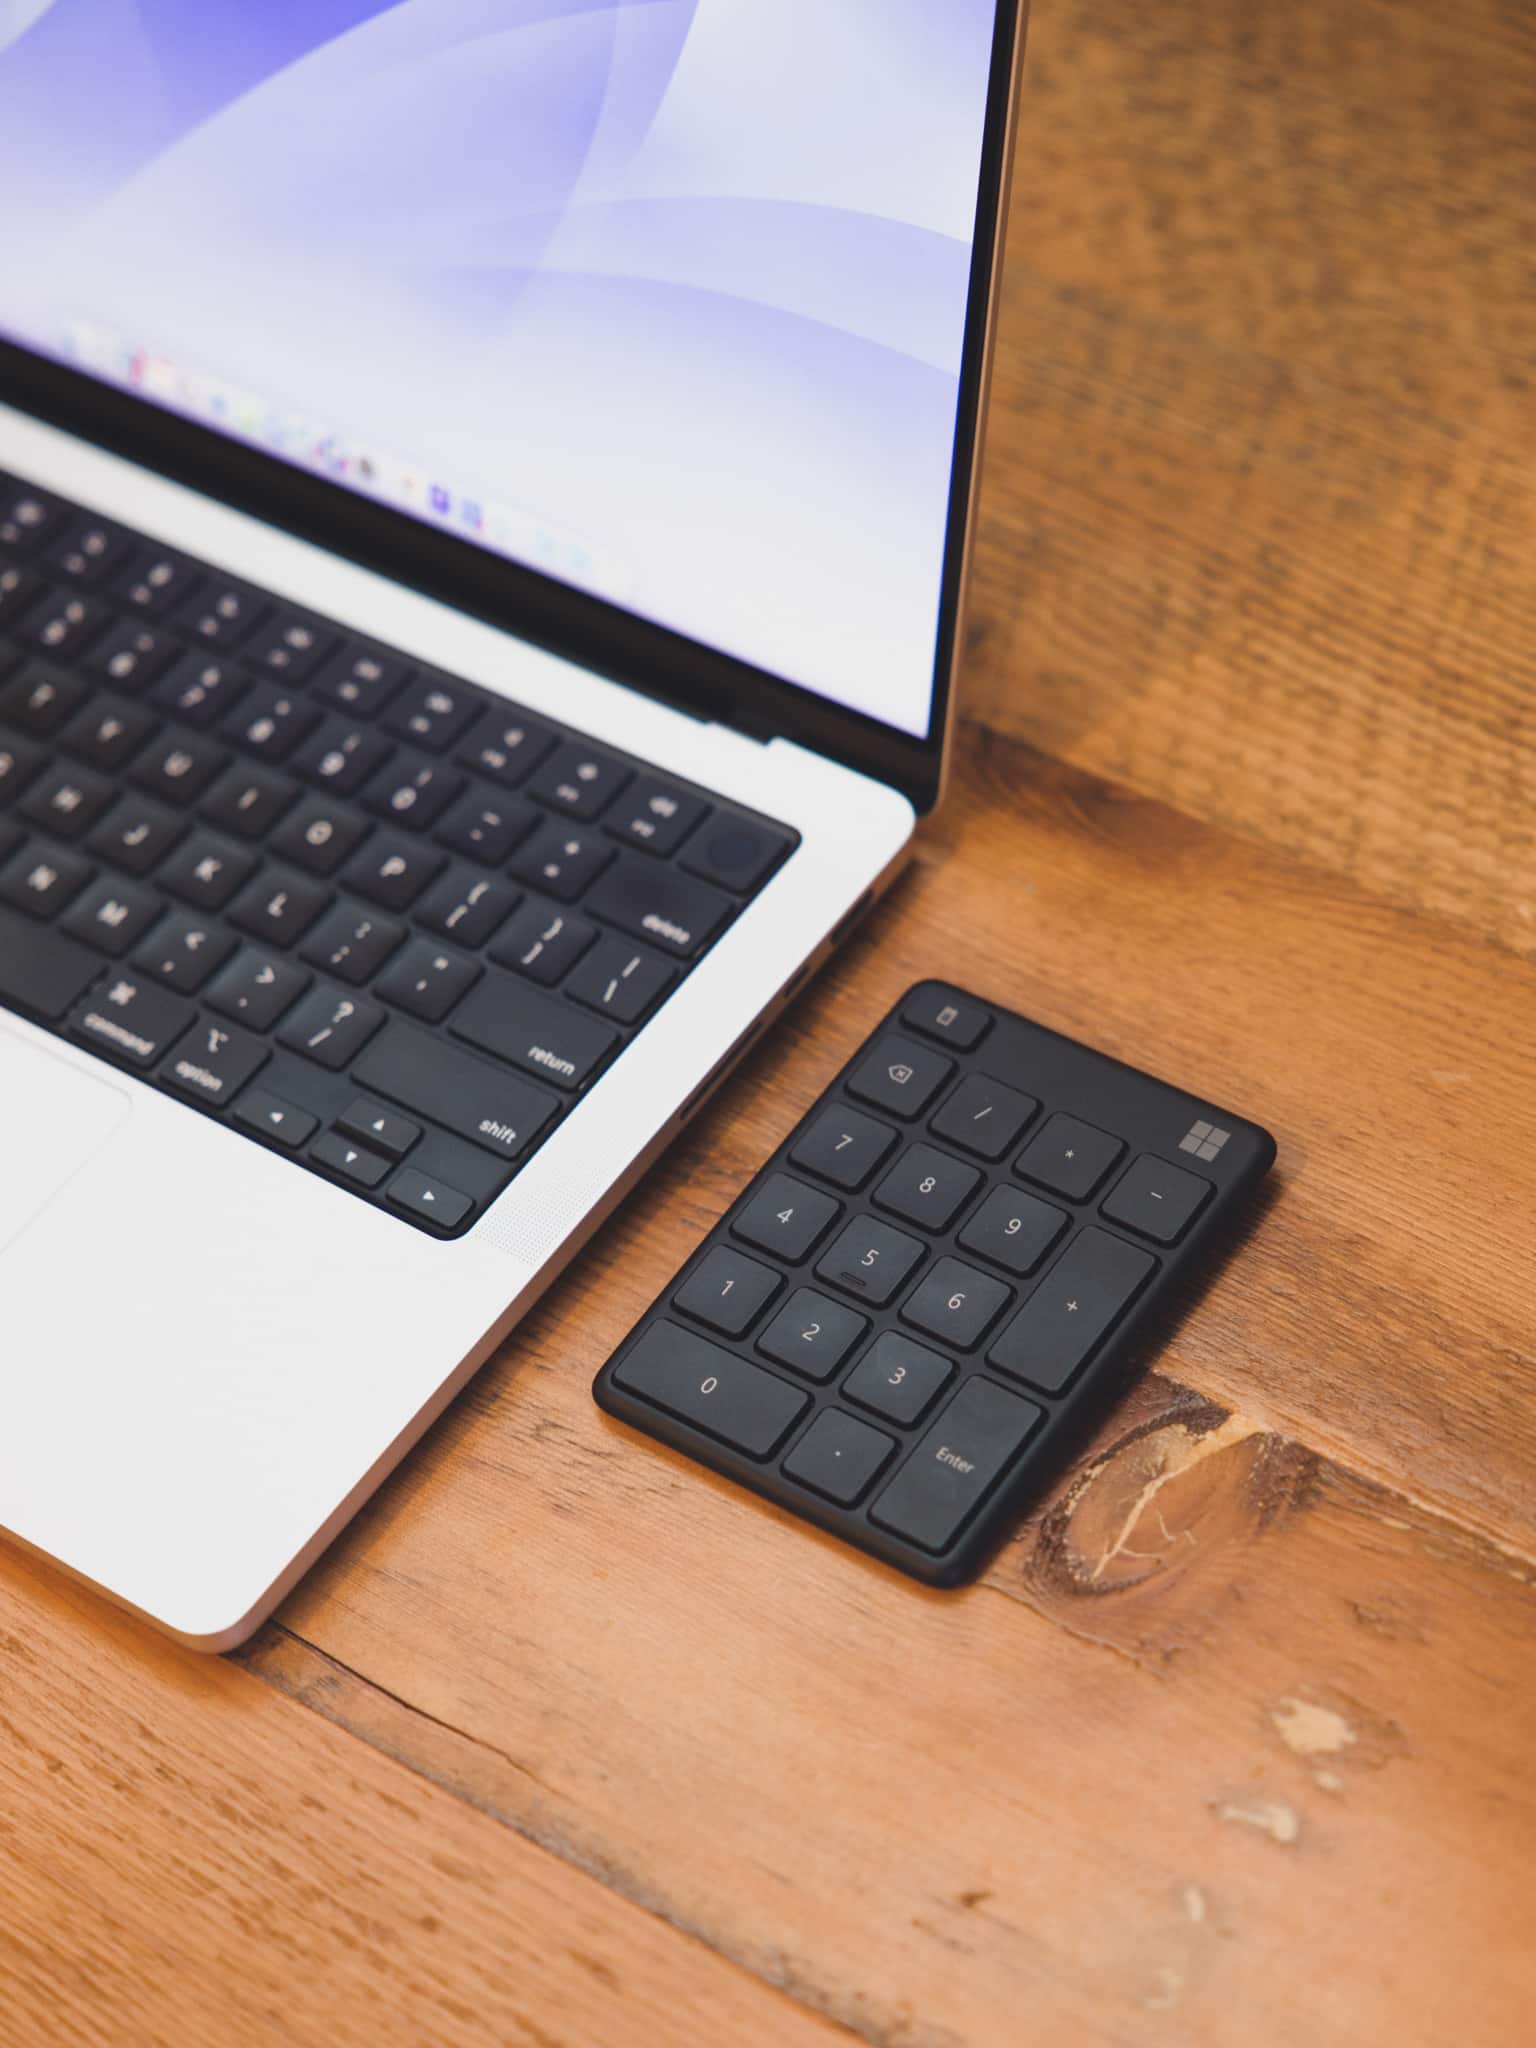 The Microsoft External Number Pad Works Great With MacBooks, With Some Workarounds